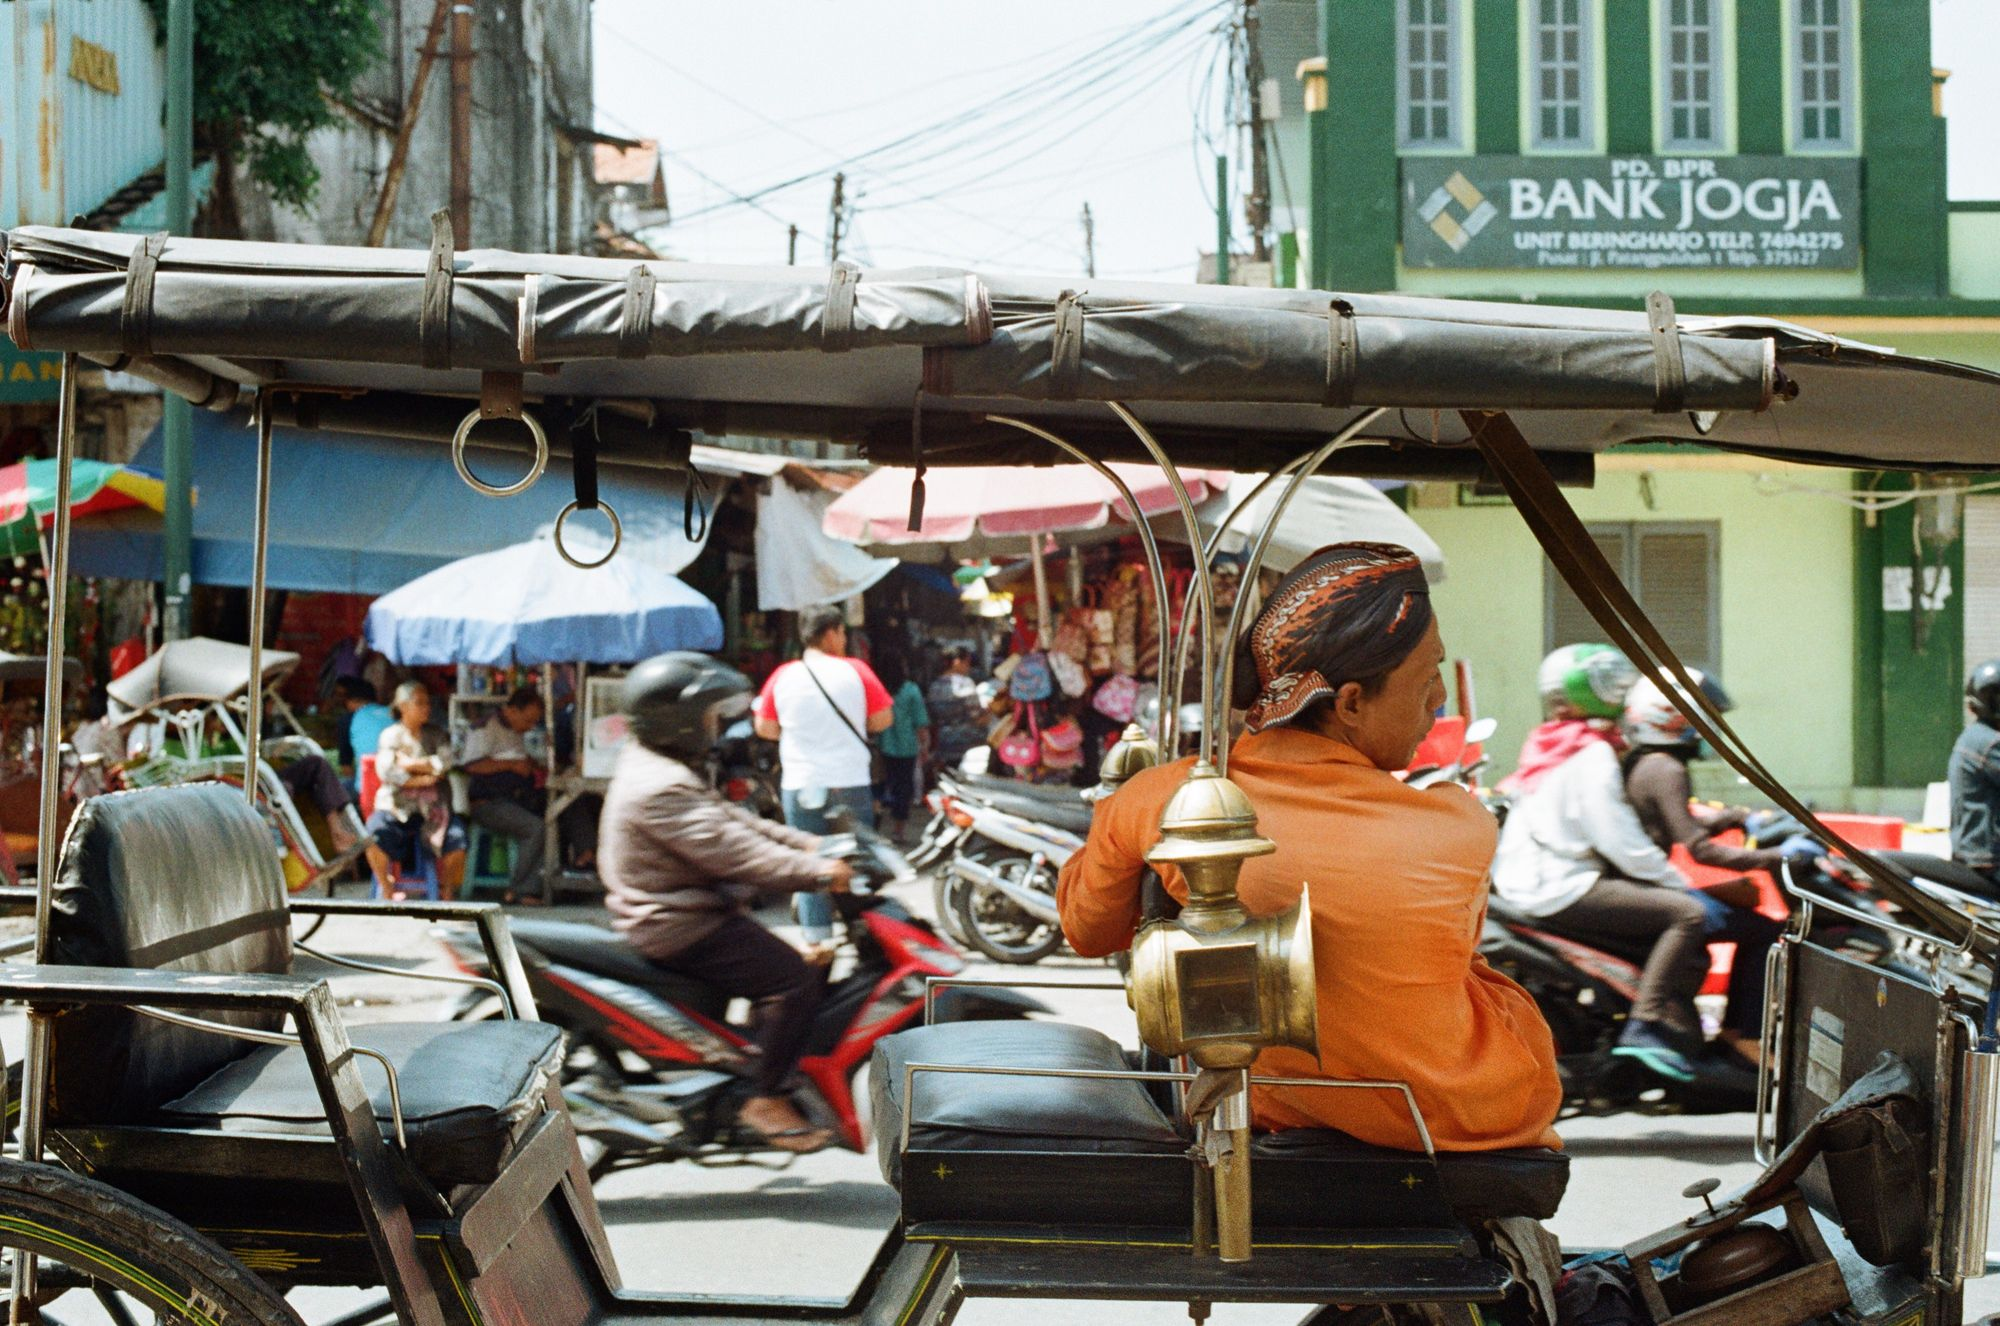 A street in Indonesia….who’s playing on their smartphones? (Photo bymark chaves)